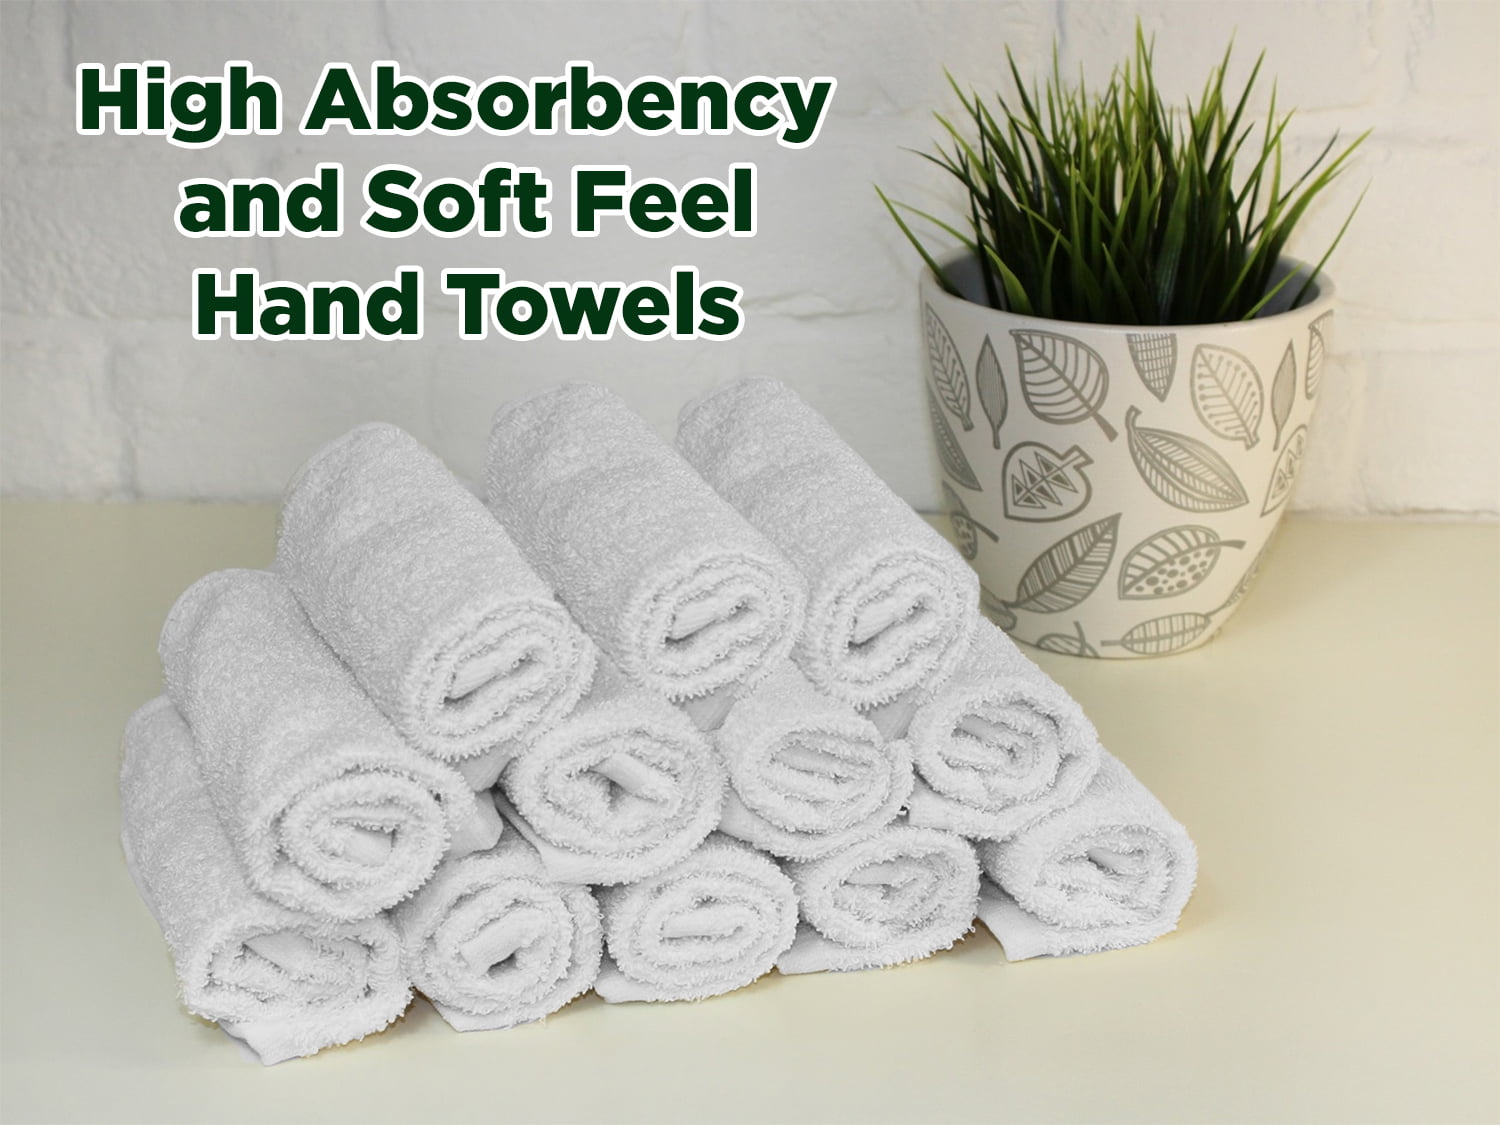 Maura Premium Hand Towels 100% Cotton 16x30 Oversized Ultra Absorbent Quick Dry Soft Towels for Bathroom Extra Large Hand Towels, Yellow